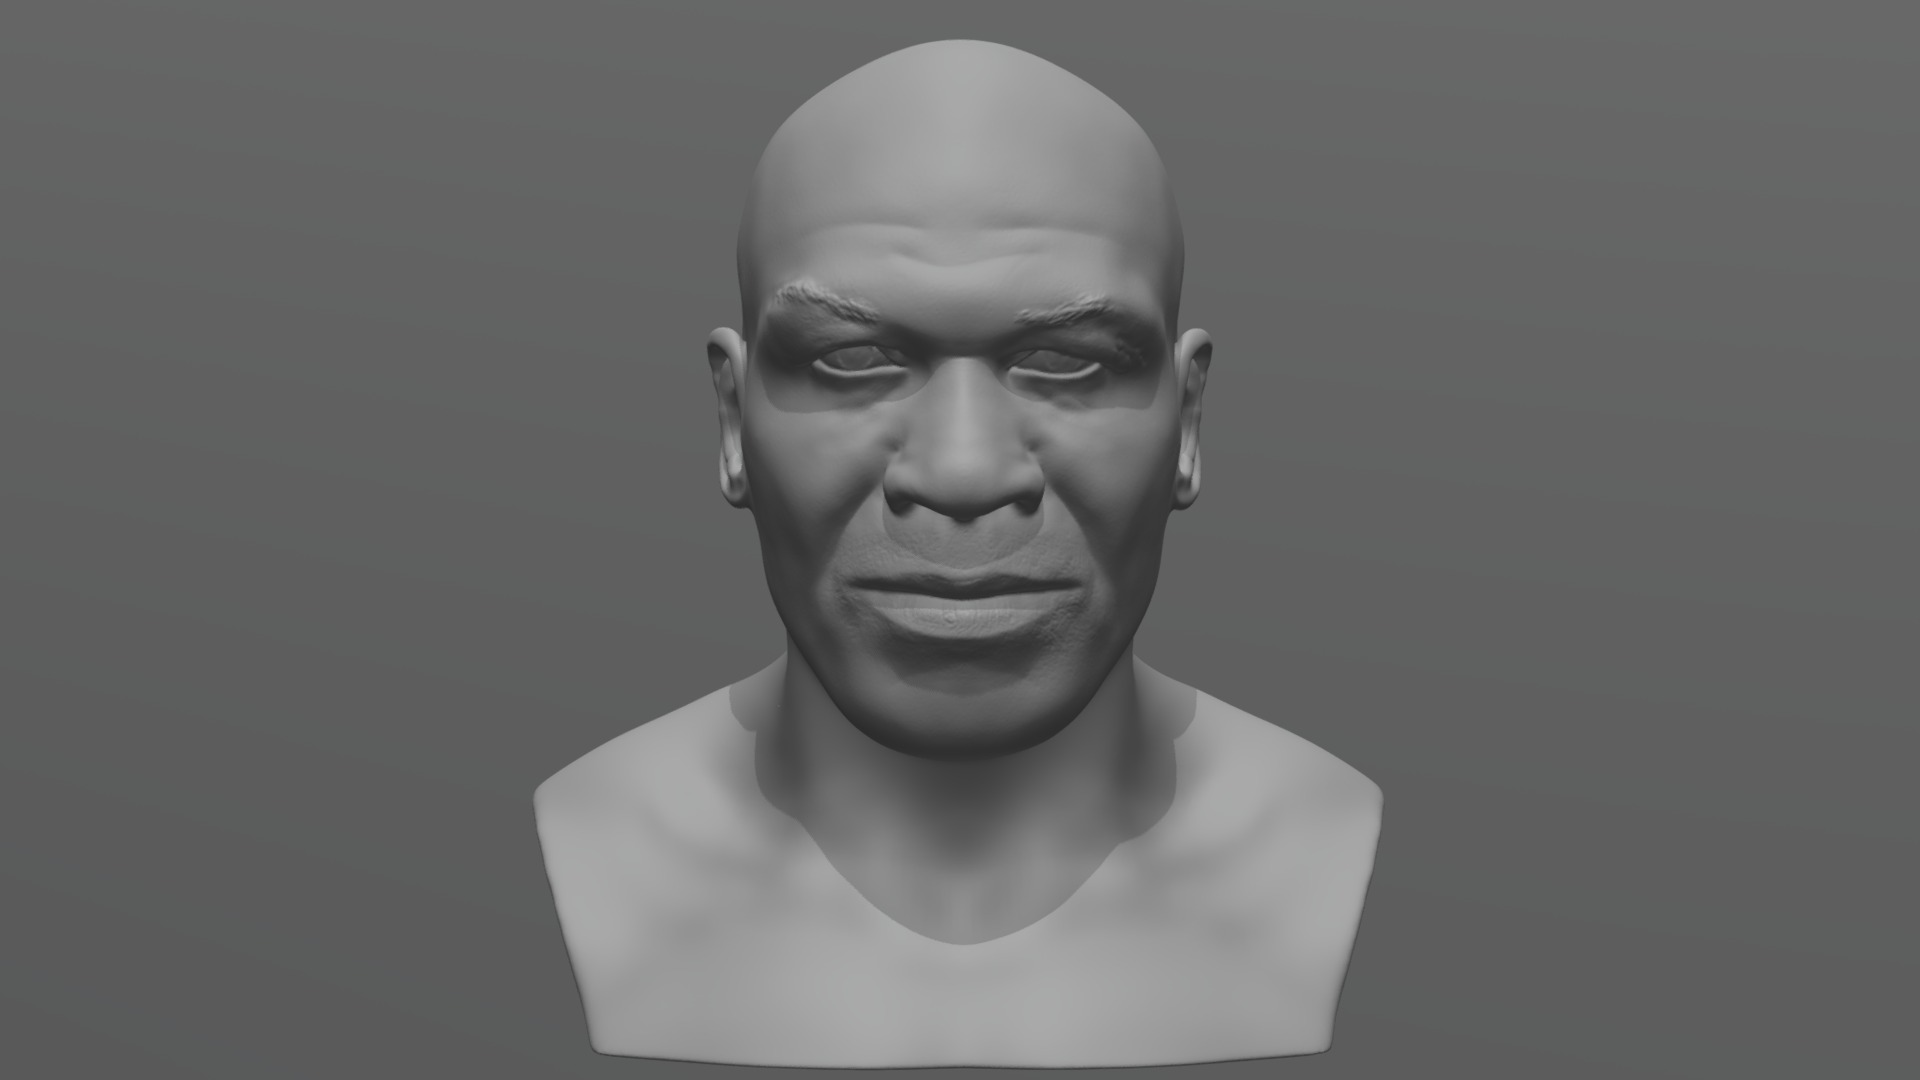 3D model Mike Tyson bust for 3D printing - This is a 3D model of the Mike Tyson bust for 3D printing. The 3D model is about a bald man with a white shirt.